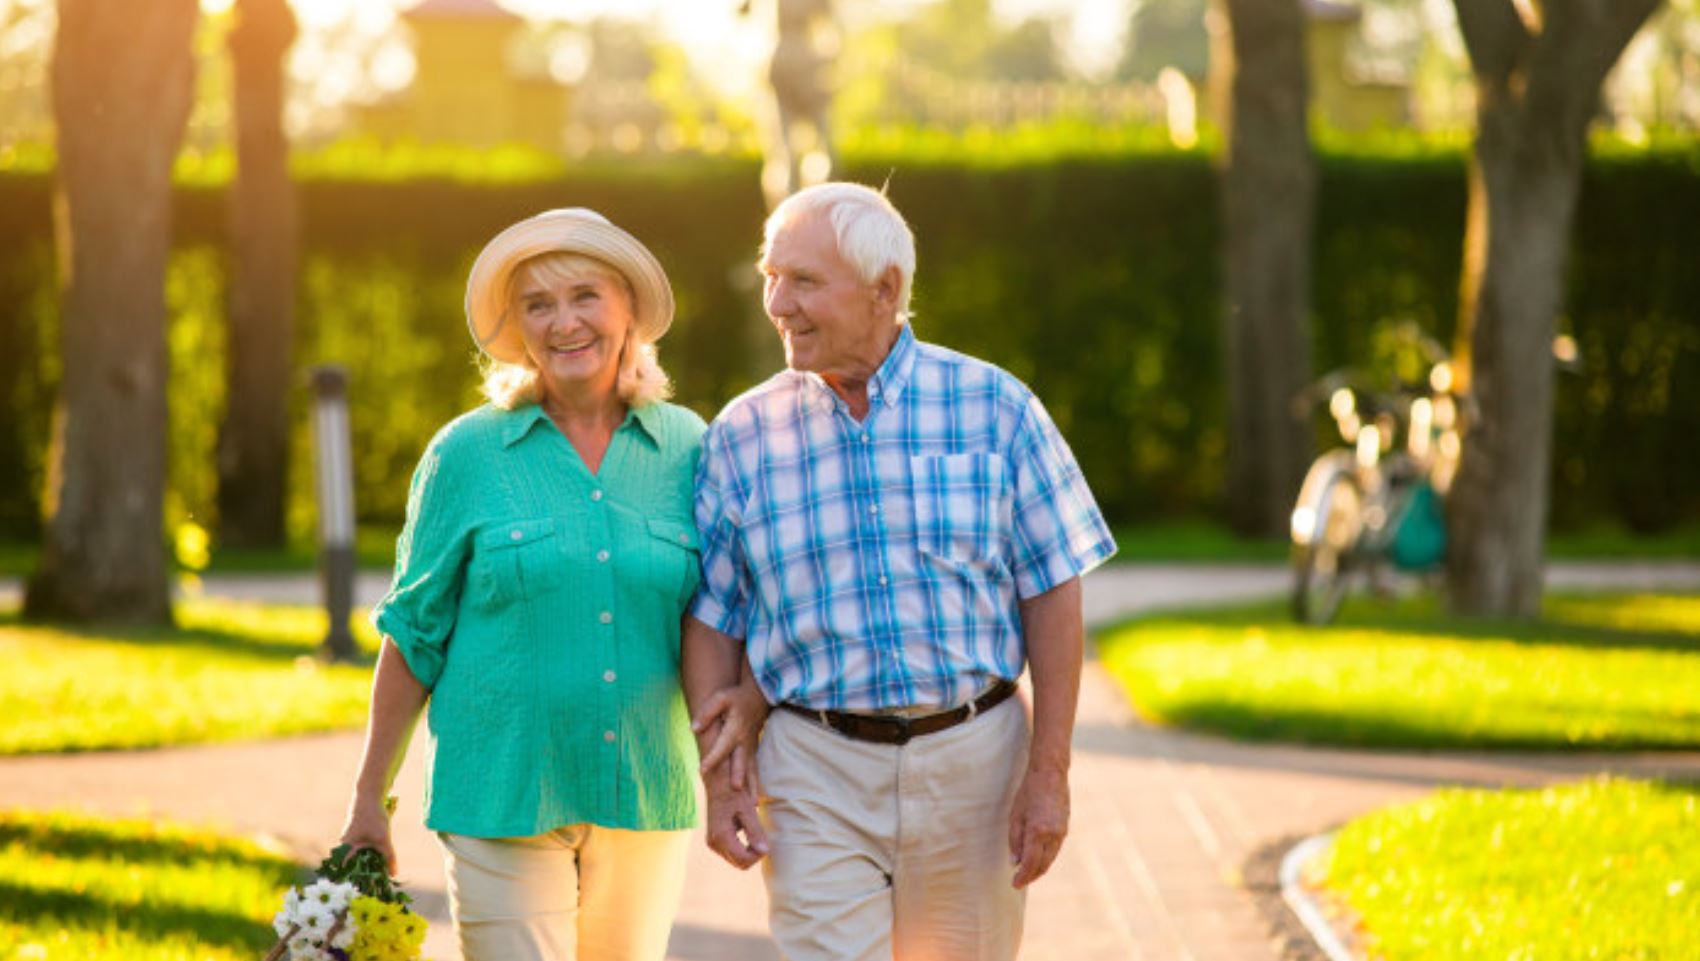 a senior couple out for a walk in a park